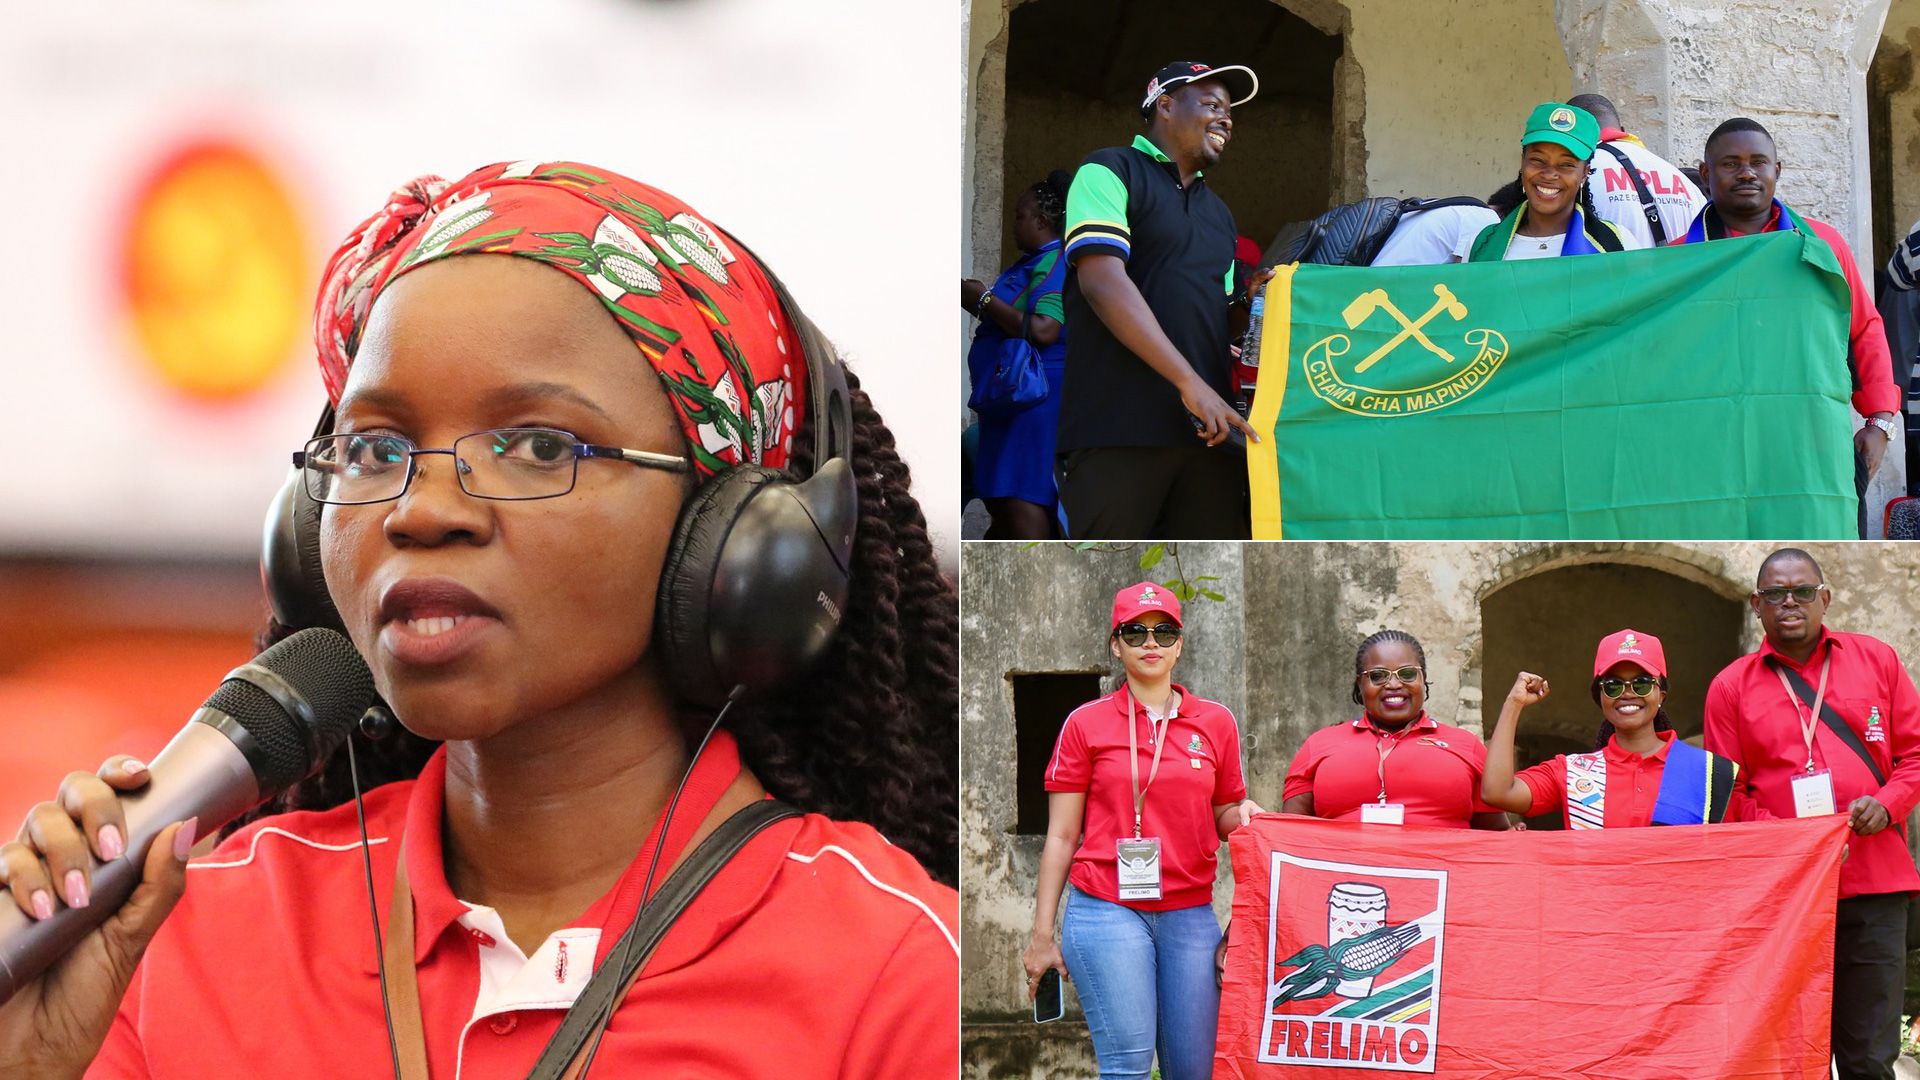  A photo collage of three photos. The first is a conference participant speaking into a microphone during a training session. The second three participants holding the green and yellow flag of Tanzania’s CCM party. The third is four participants holding the flag of Mozambique’s FRELIMO party.